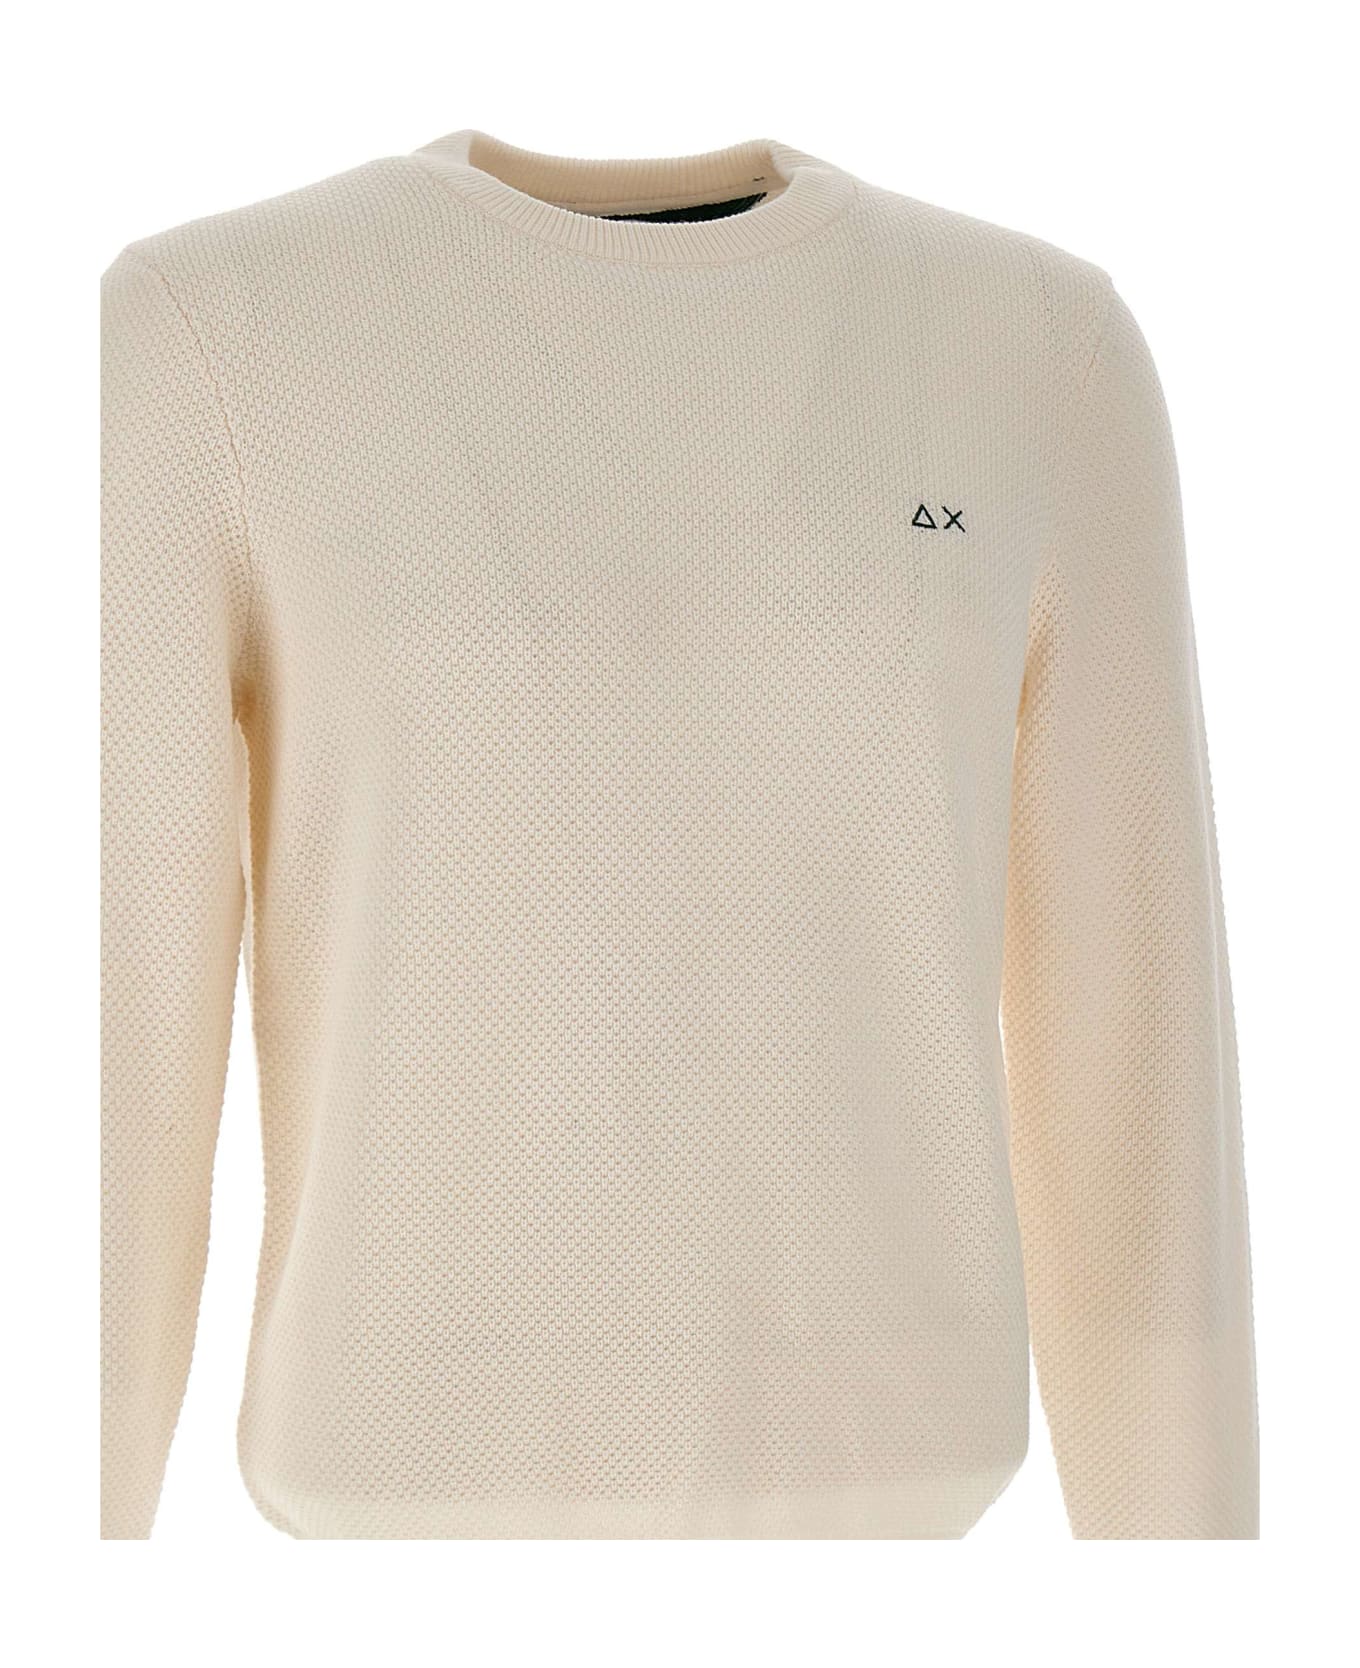 Sun 68 'round Rice Knit' Wool And Cotton Sweater - WHITE